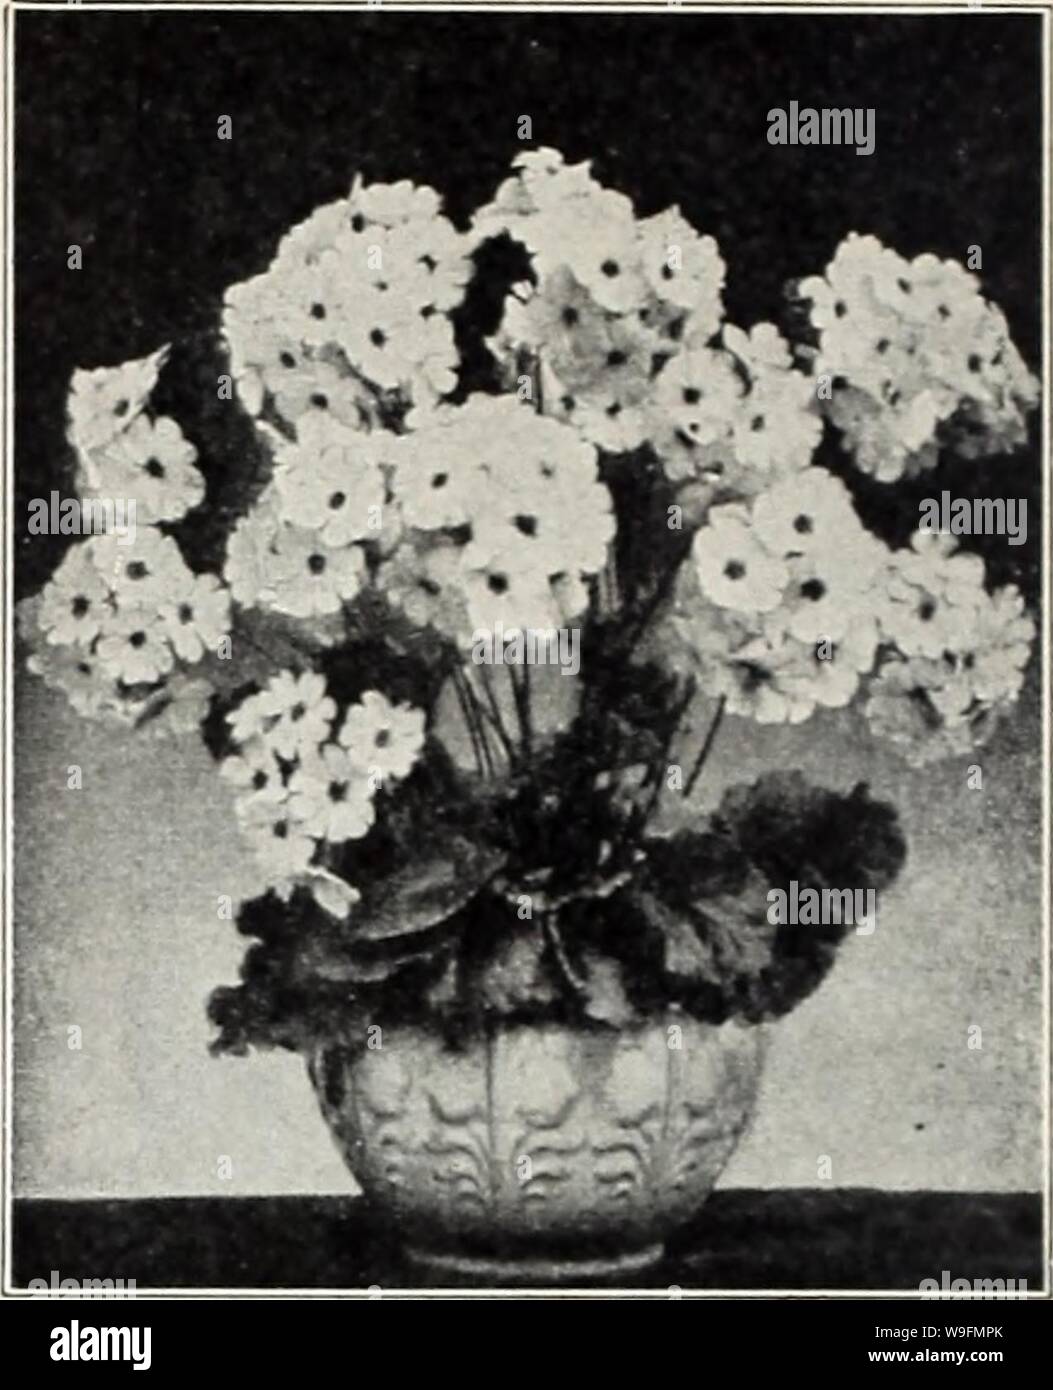 Archive image from page 55 of Currie's 65th year garden annual. Currie's 65th year garden annual  curries65thyearg19curr Year: 1940 ( PRIMULA OBCONICA GIGANTEA Finest of the Obconico or Everbloom- ing Primroses. Blooms ore extremely large. GIGANTEA HYBRIDA MIXED—Pkt., PRIMULA KEWENSIS A very fragront soft yellow variety of the ever-blooming type; the flower stems often 12' to 15' in length. Verbena scented. Pkt., 20c. PRIMULA MALACOIDES (Giant Baby Primrose)—The flowers, of a pretty light lilac, are borne in whorls. Pkt., 25e. PRIMROSE GIANT FRINGED CHINESE—Chinese Primroses are among our fine Stock Photo